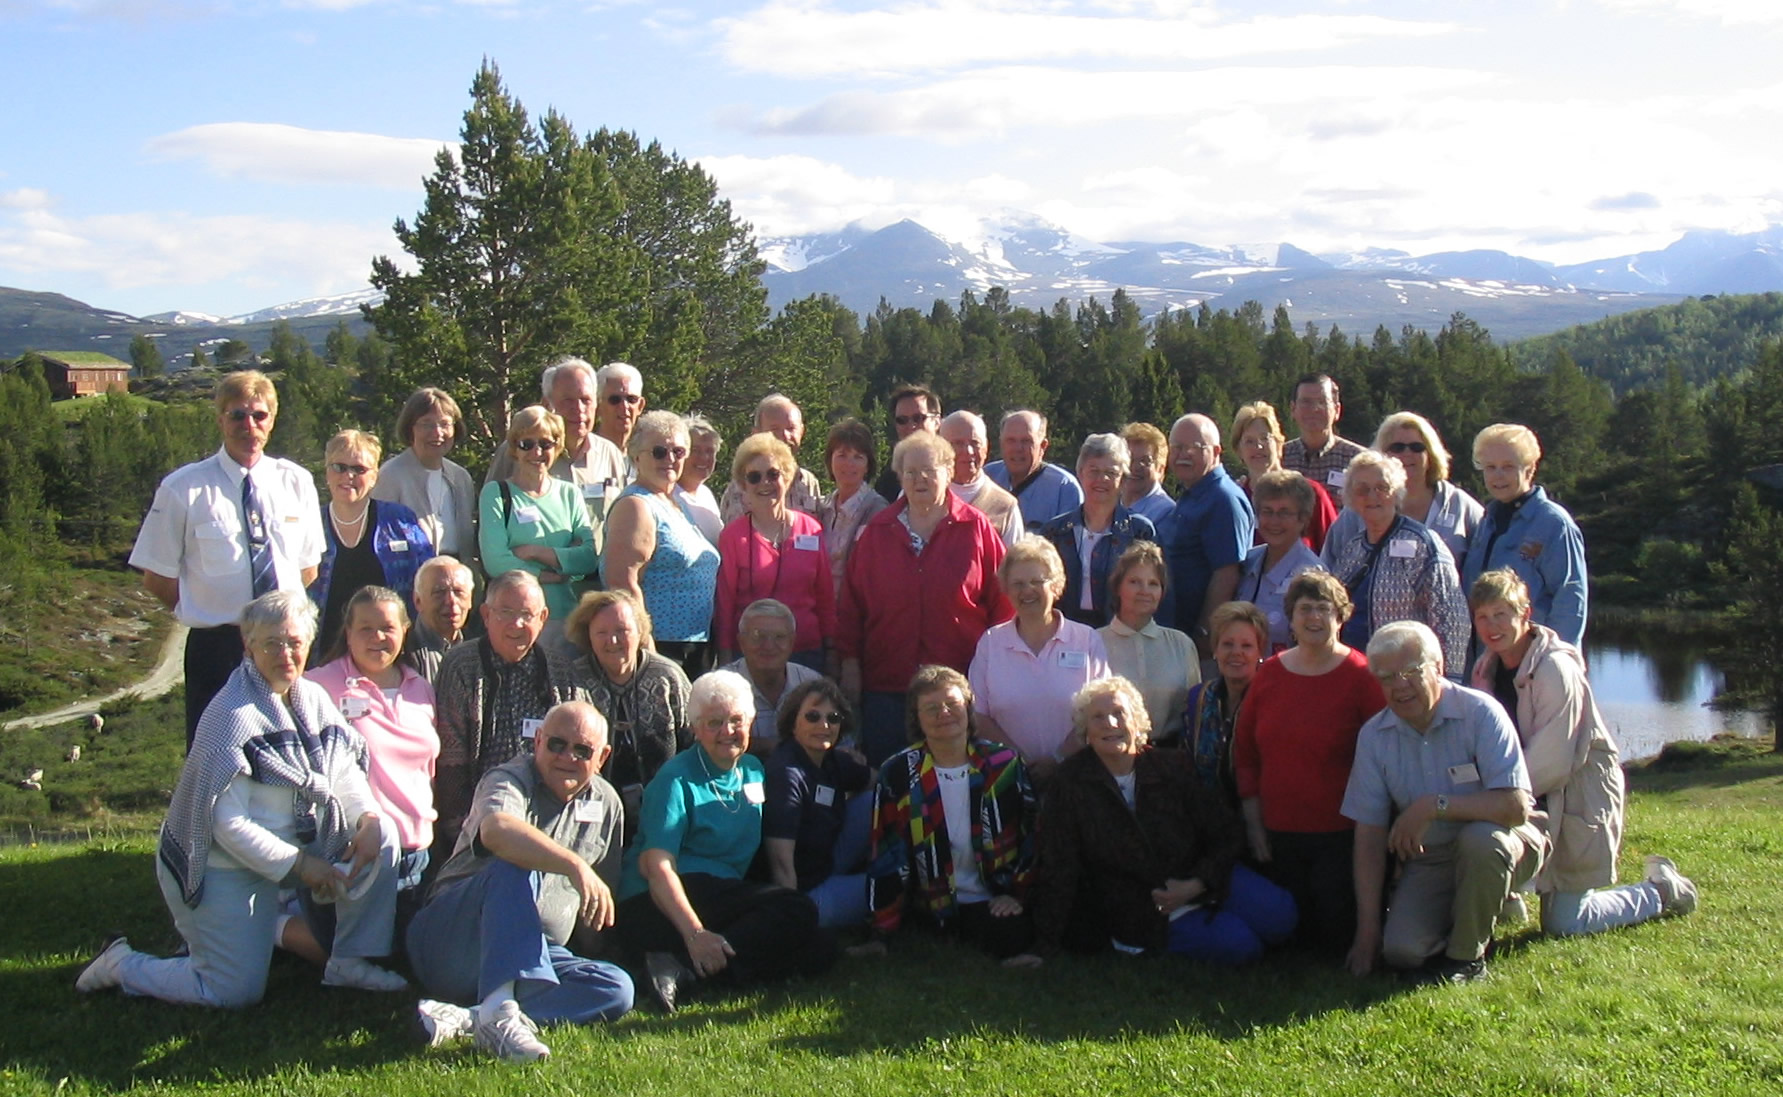 Group photo from Otta, Norway